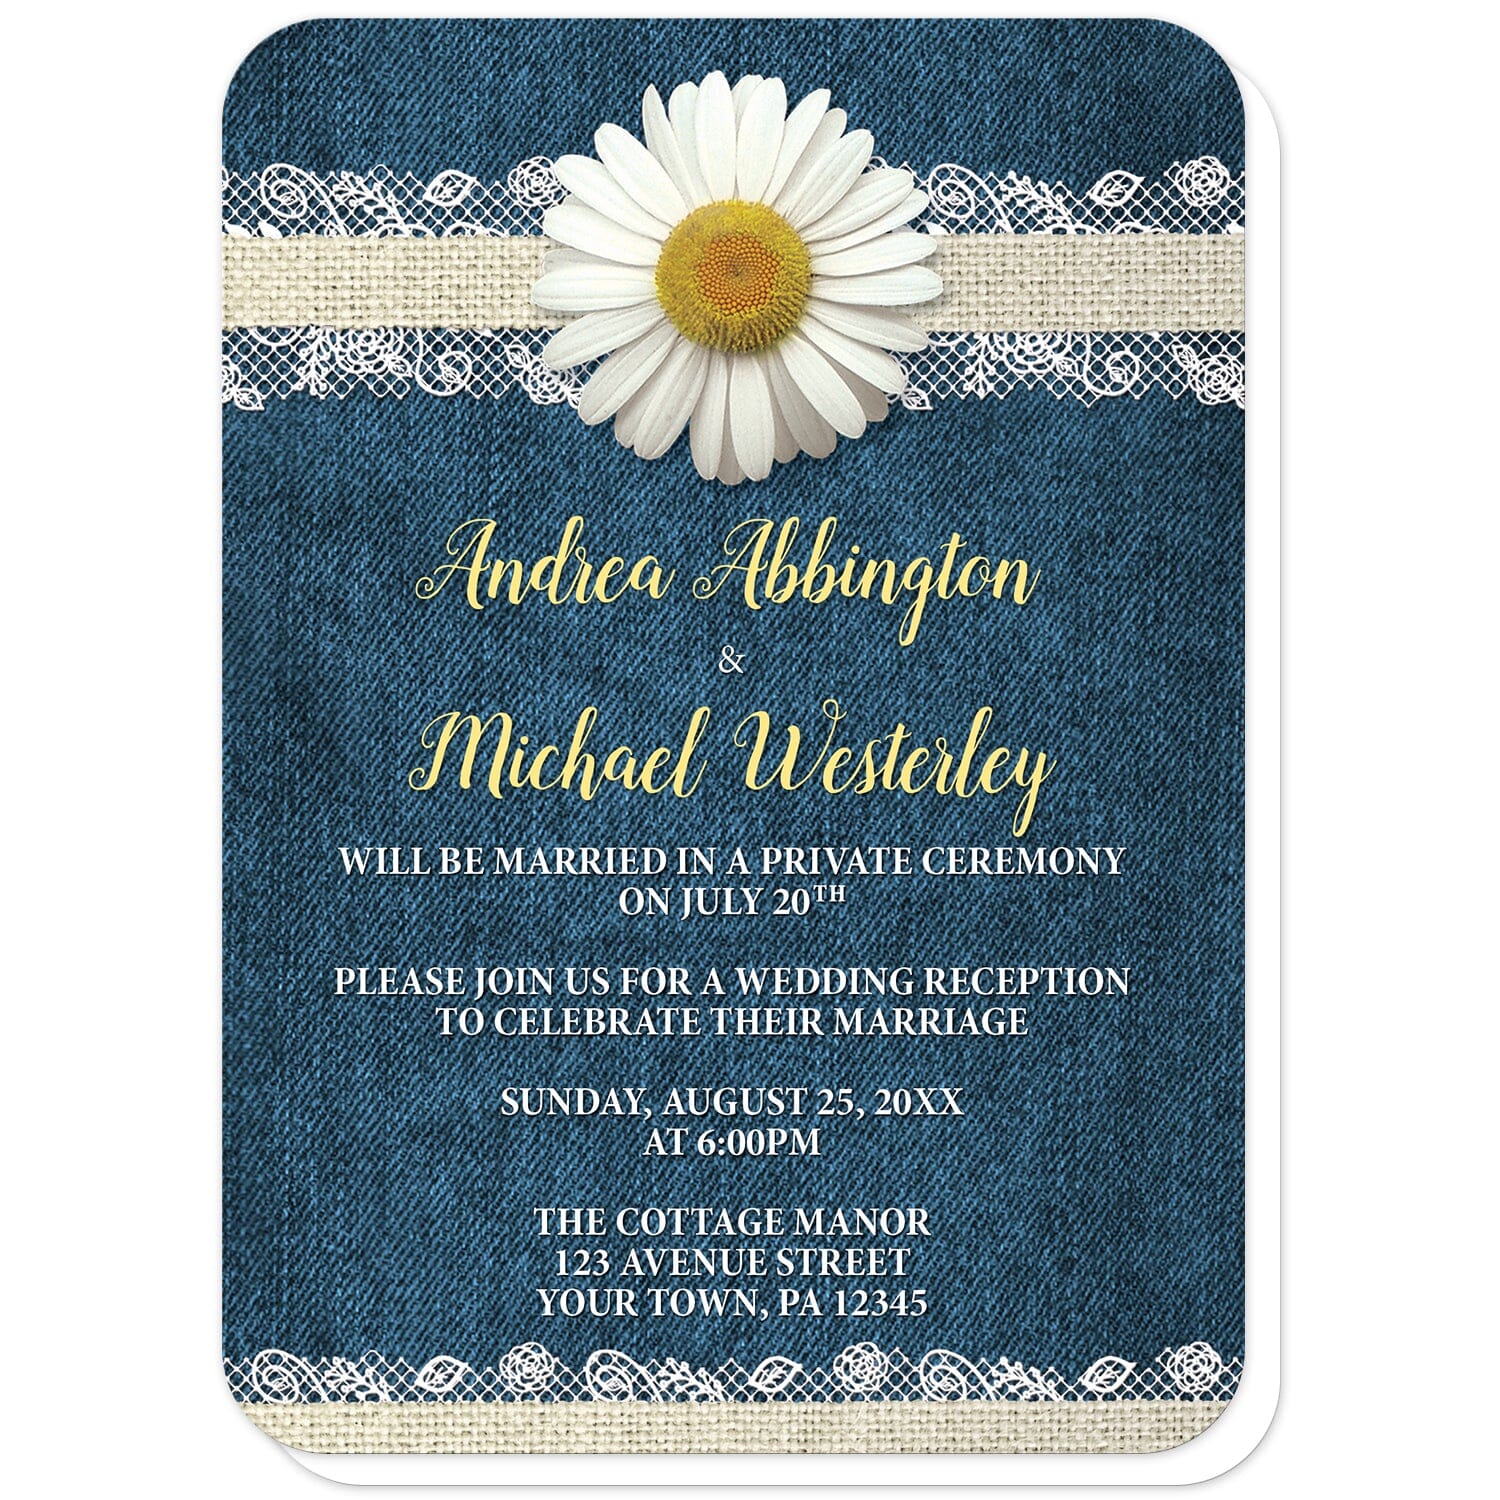 Daisy Burlap and Lace Denim Reception Only Invitations (with rounded corners) at Artistically Invited.